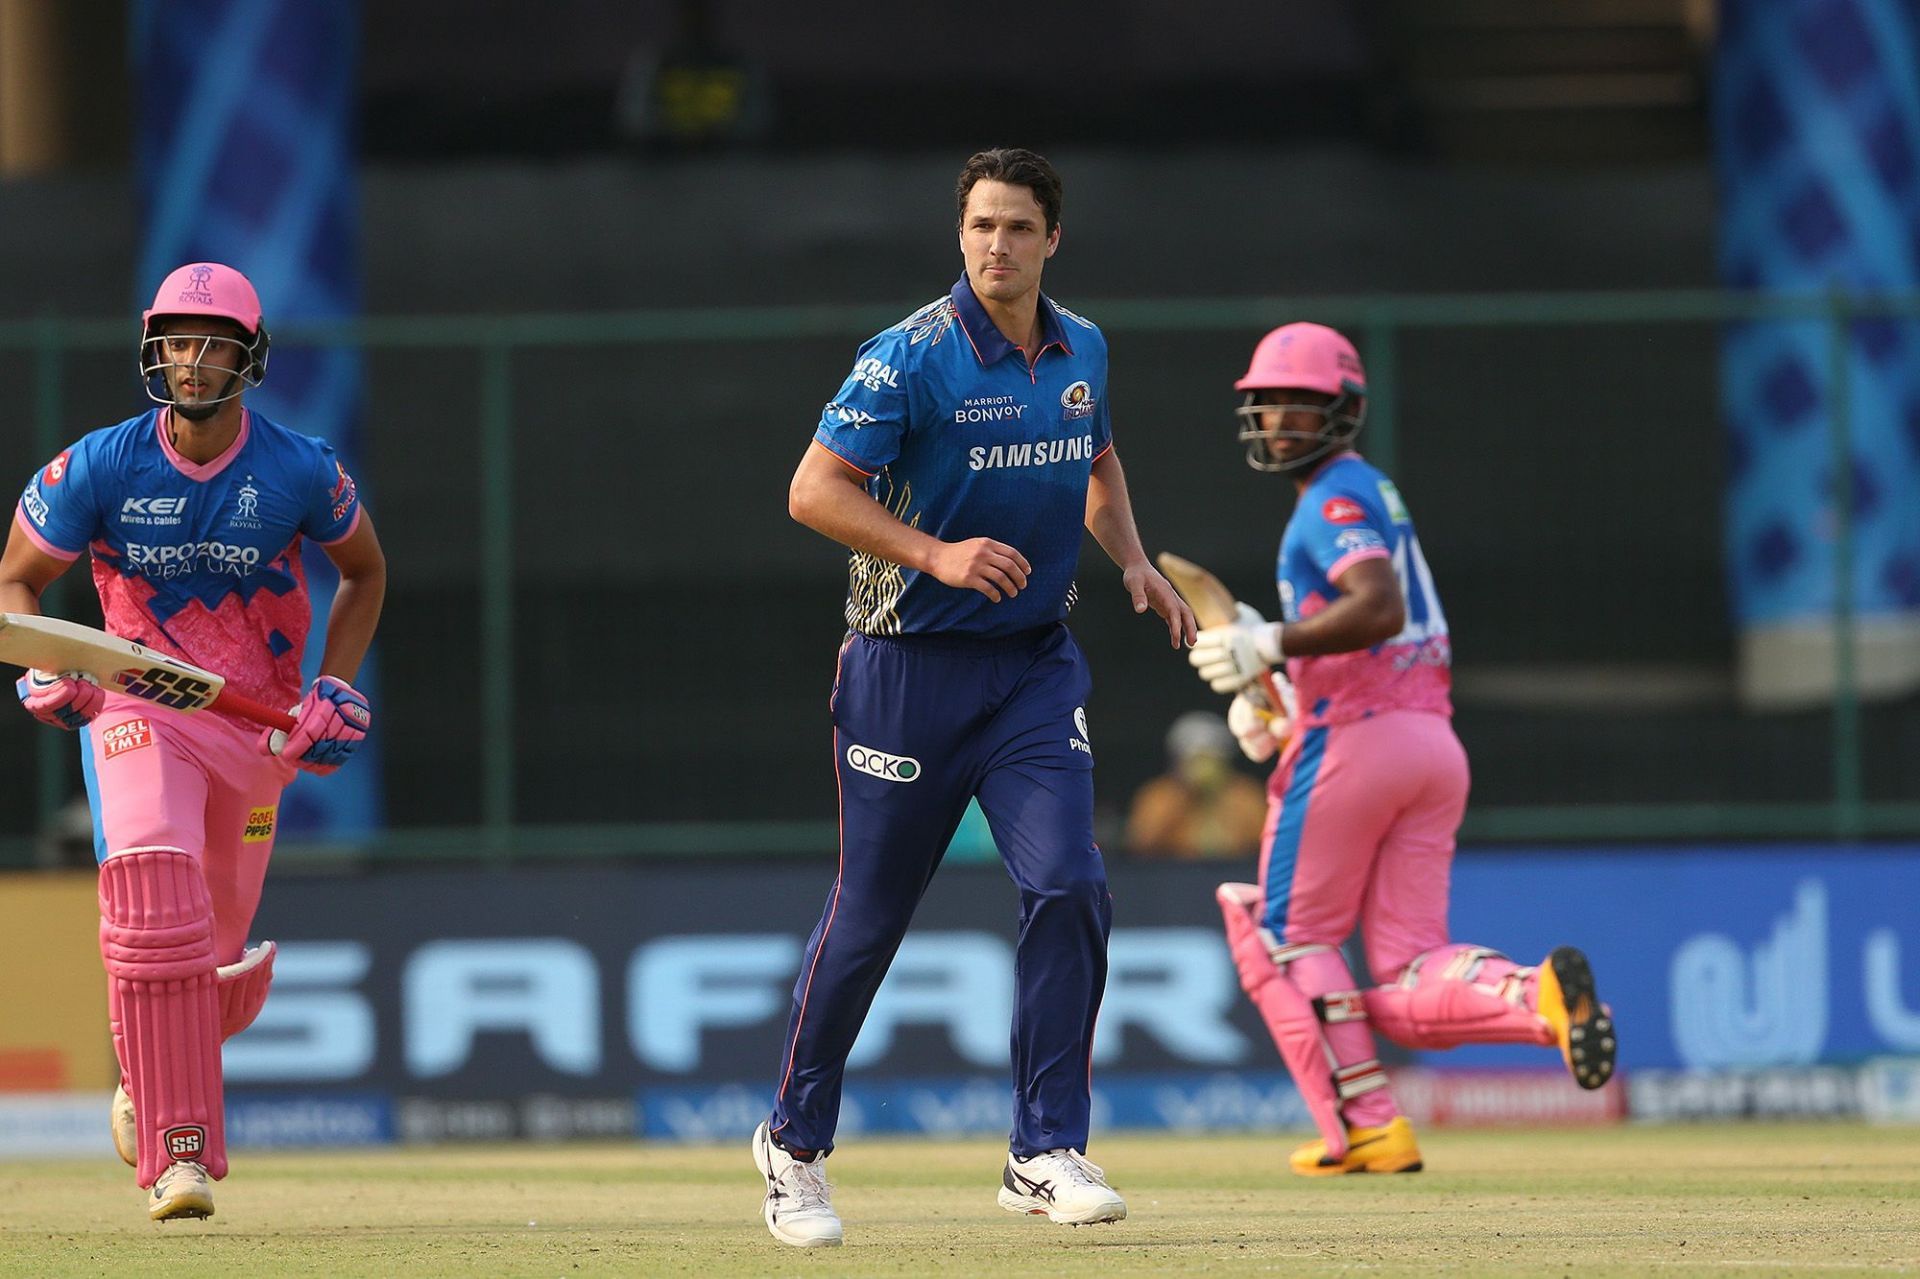 Nathan Coulter-Nile bowled a match-winning spell of 4/14 last year against the Rajasthan Royals (Image Courtesy: IPLT20.com).